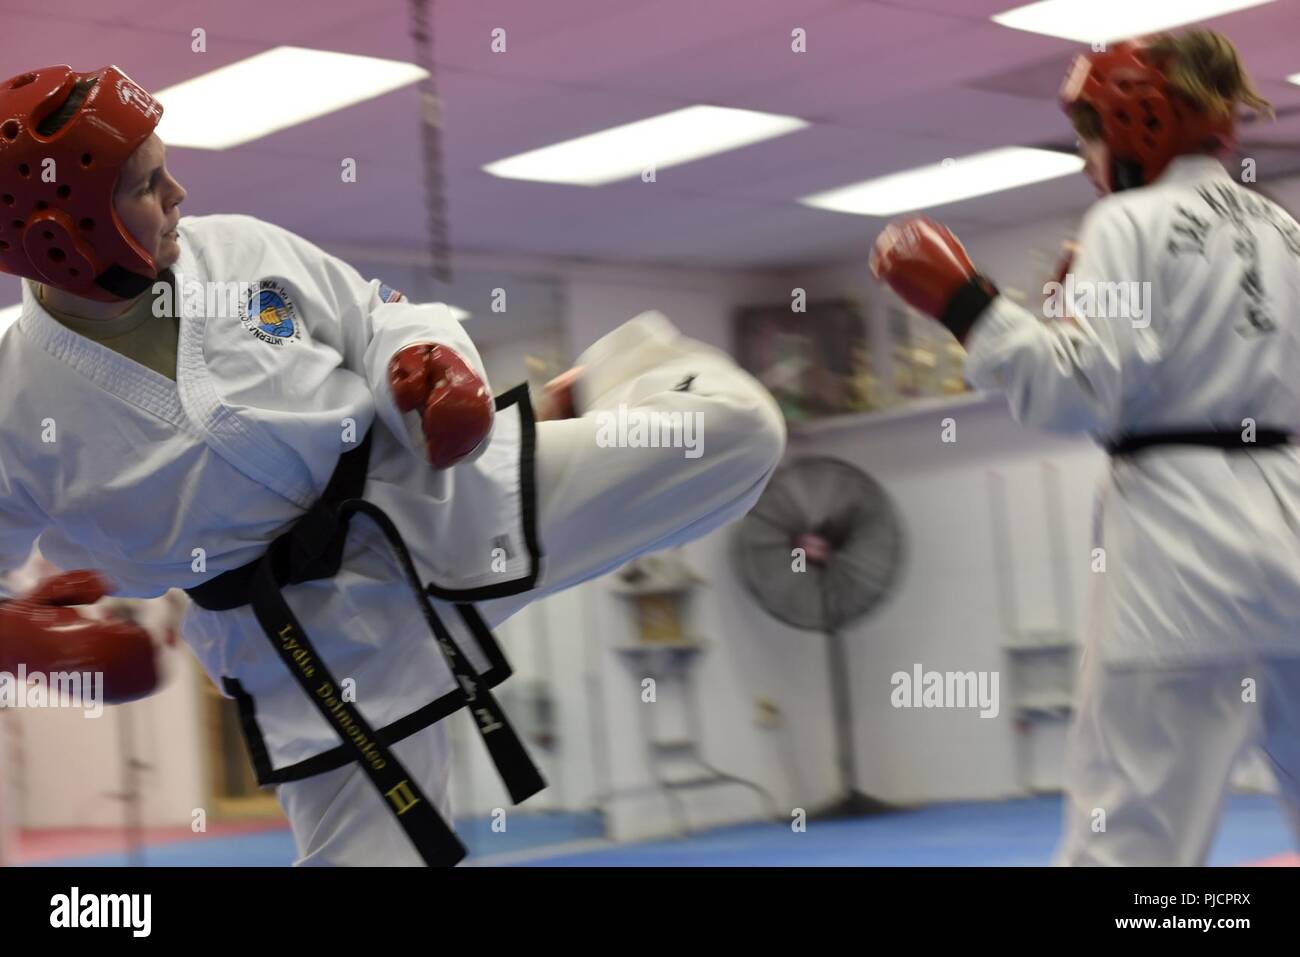 1st Class Lydia Delmonico, an information technology specialist assigned to the 180th Fighter Wing, Ohio Air National Guard, trains for the International Taekwondo Federation World Championships by sparring against a teammate at Great Lakes Global Taekwondo in Sylvania, Ohio, July 11,2018. The ITF World Championships take place from July 31through Aug. 5 in Buenos Aires, Argentina and includes 28 other nations. Stock Photo